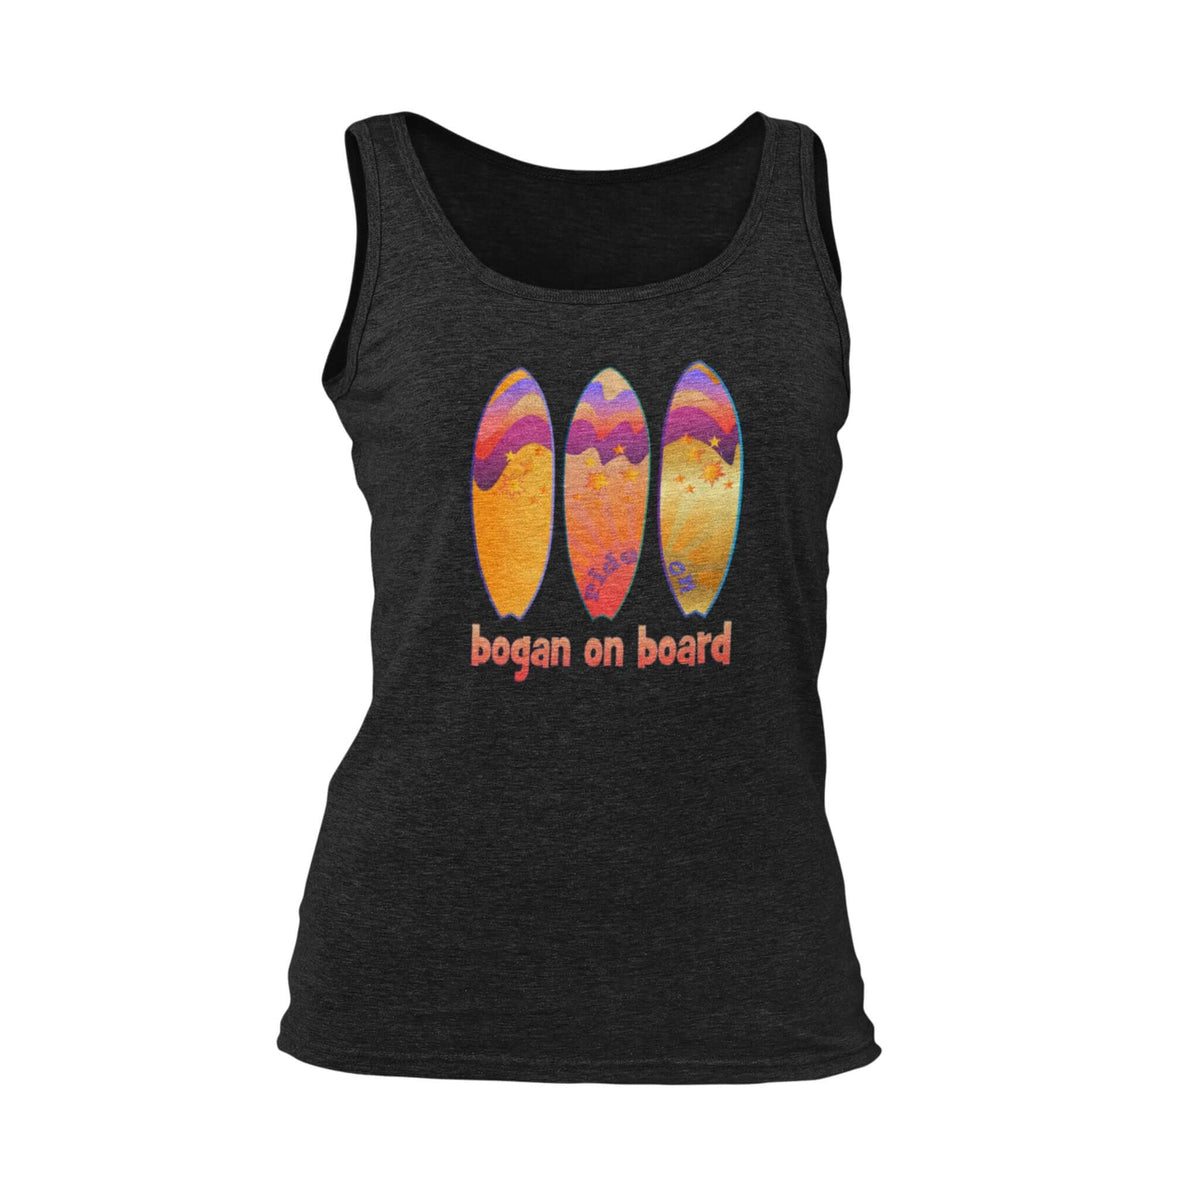 Black tank top with colourful Aussie surf design.